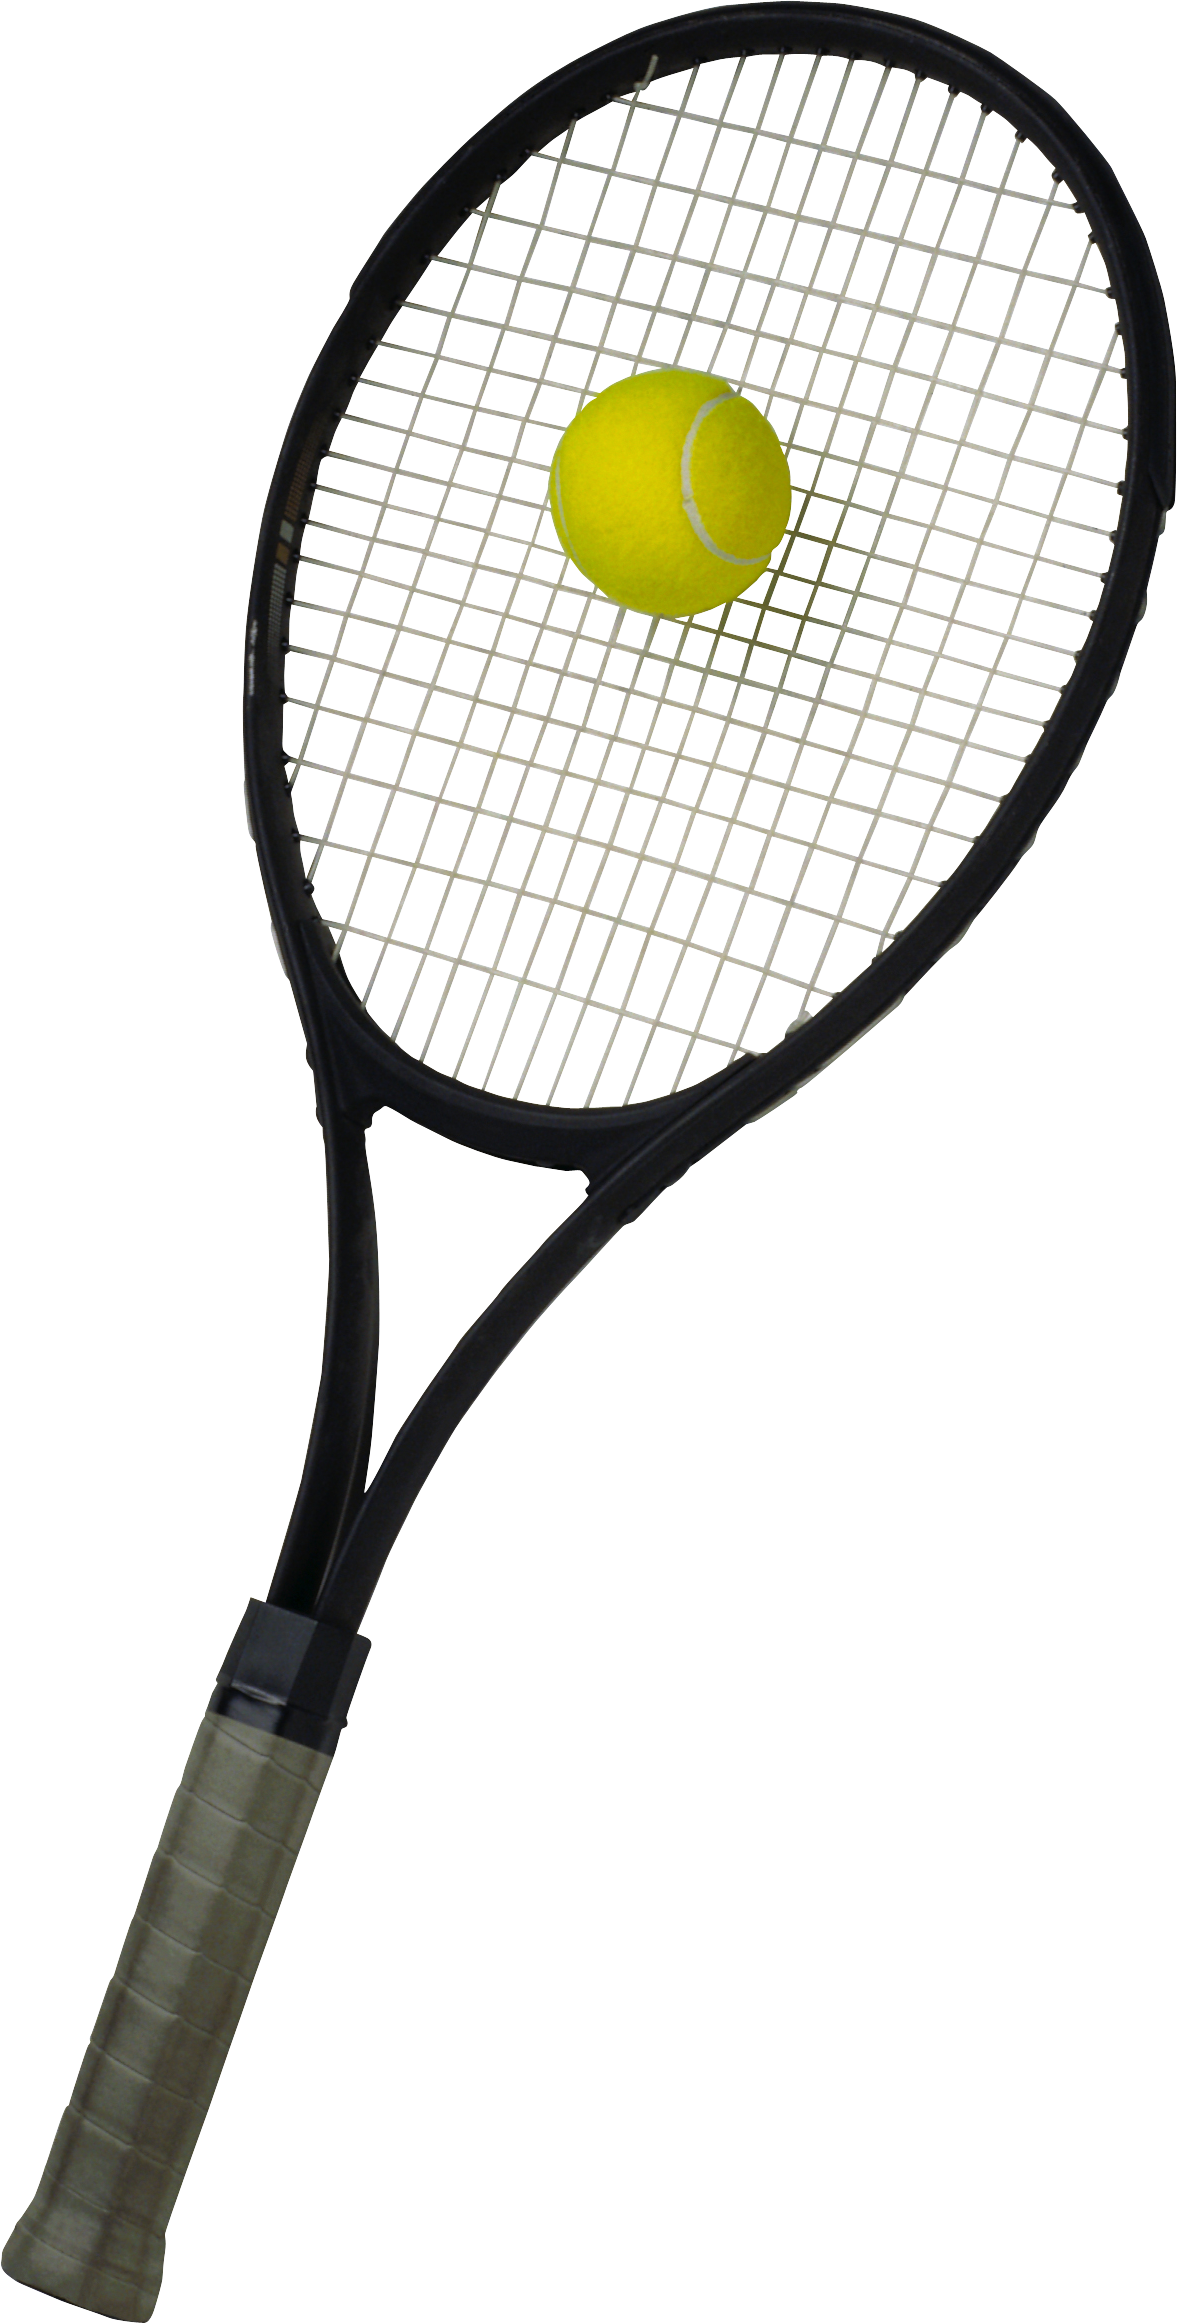 Tennis Racket with ball